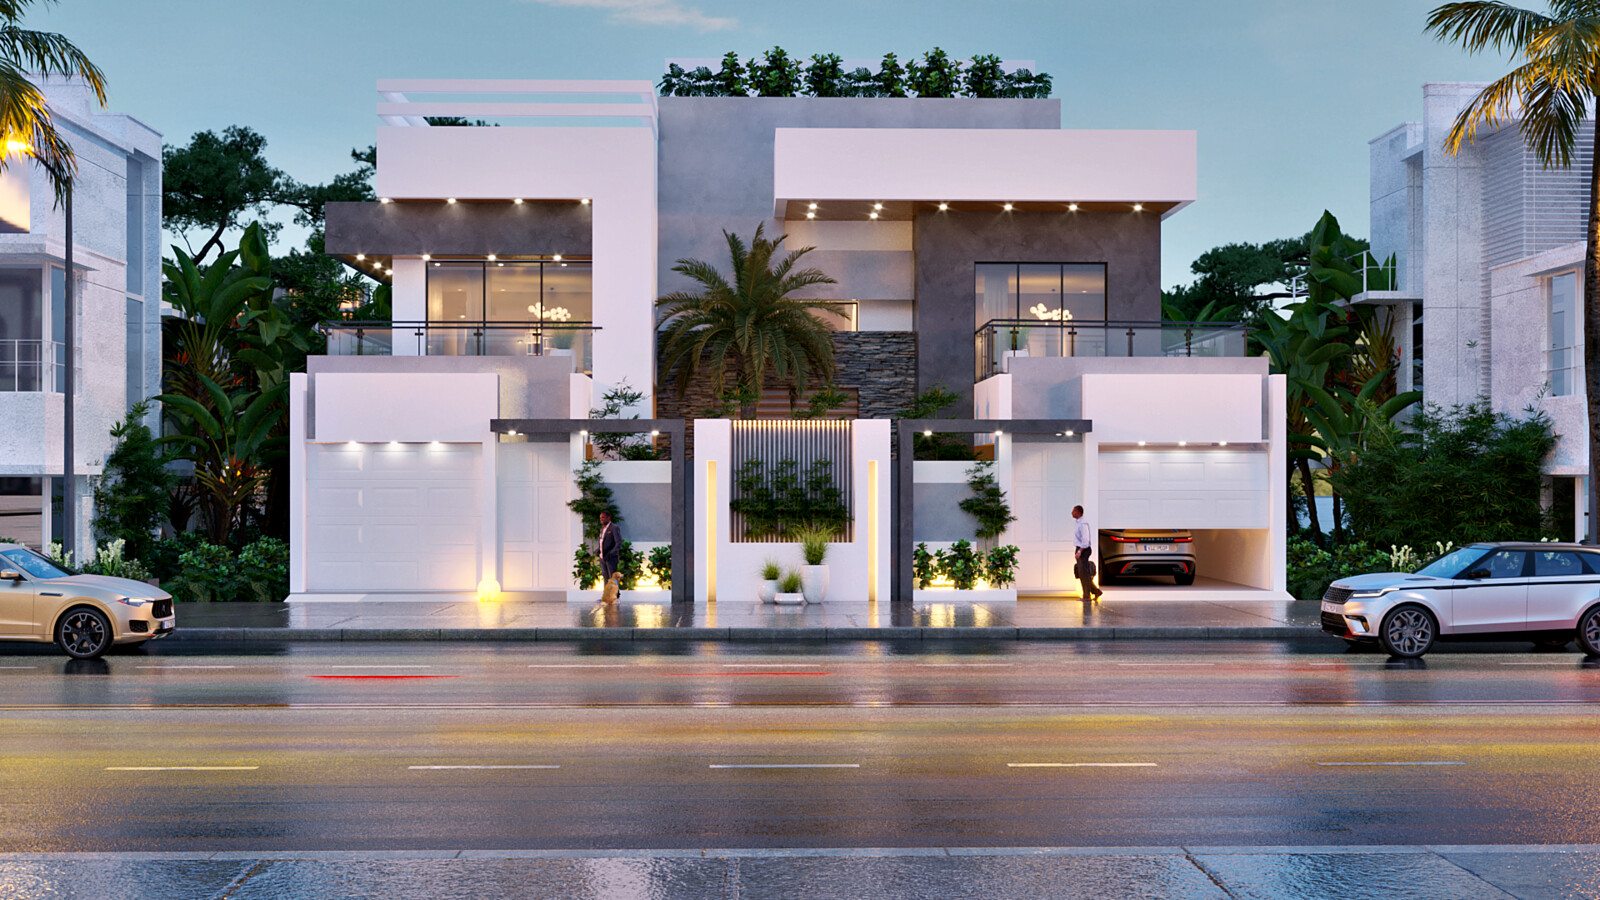 Dual Villa Concept: Creative Design and High-Quality Renderings